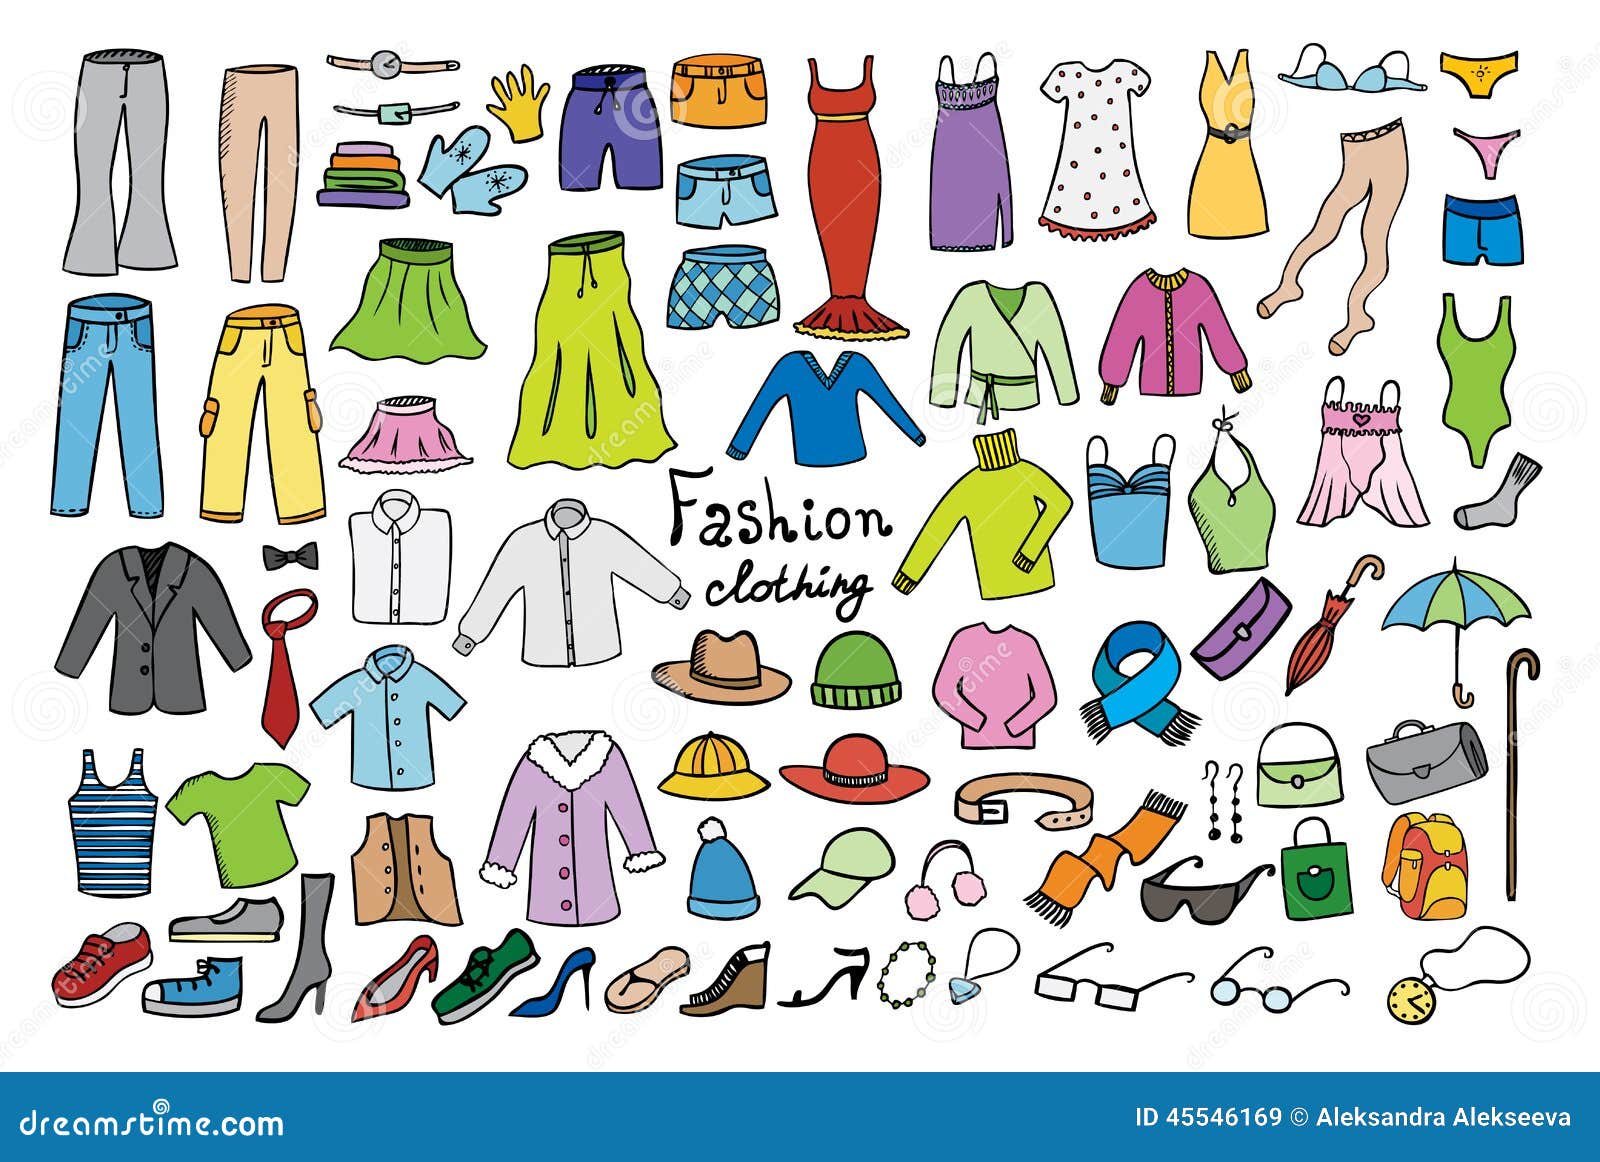 fashion and clothing color icons collection